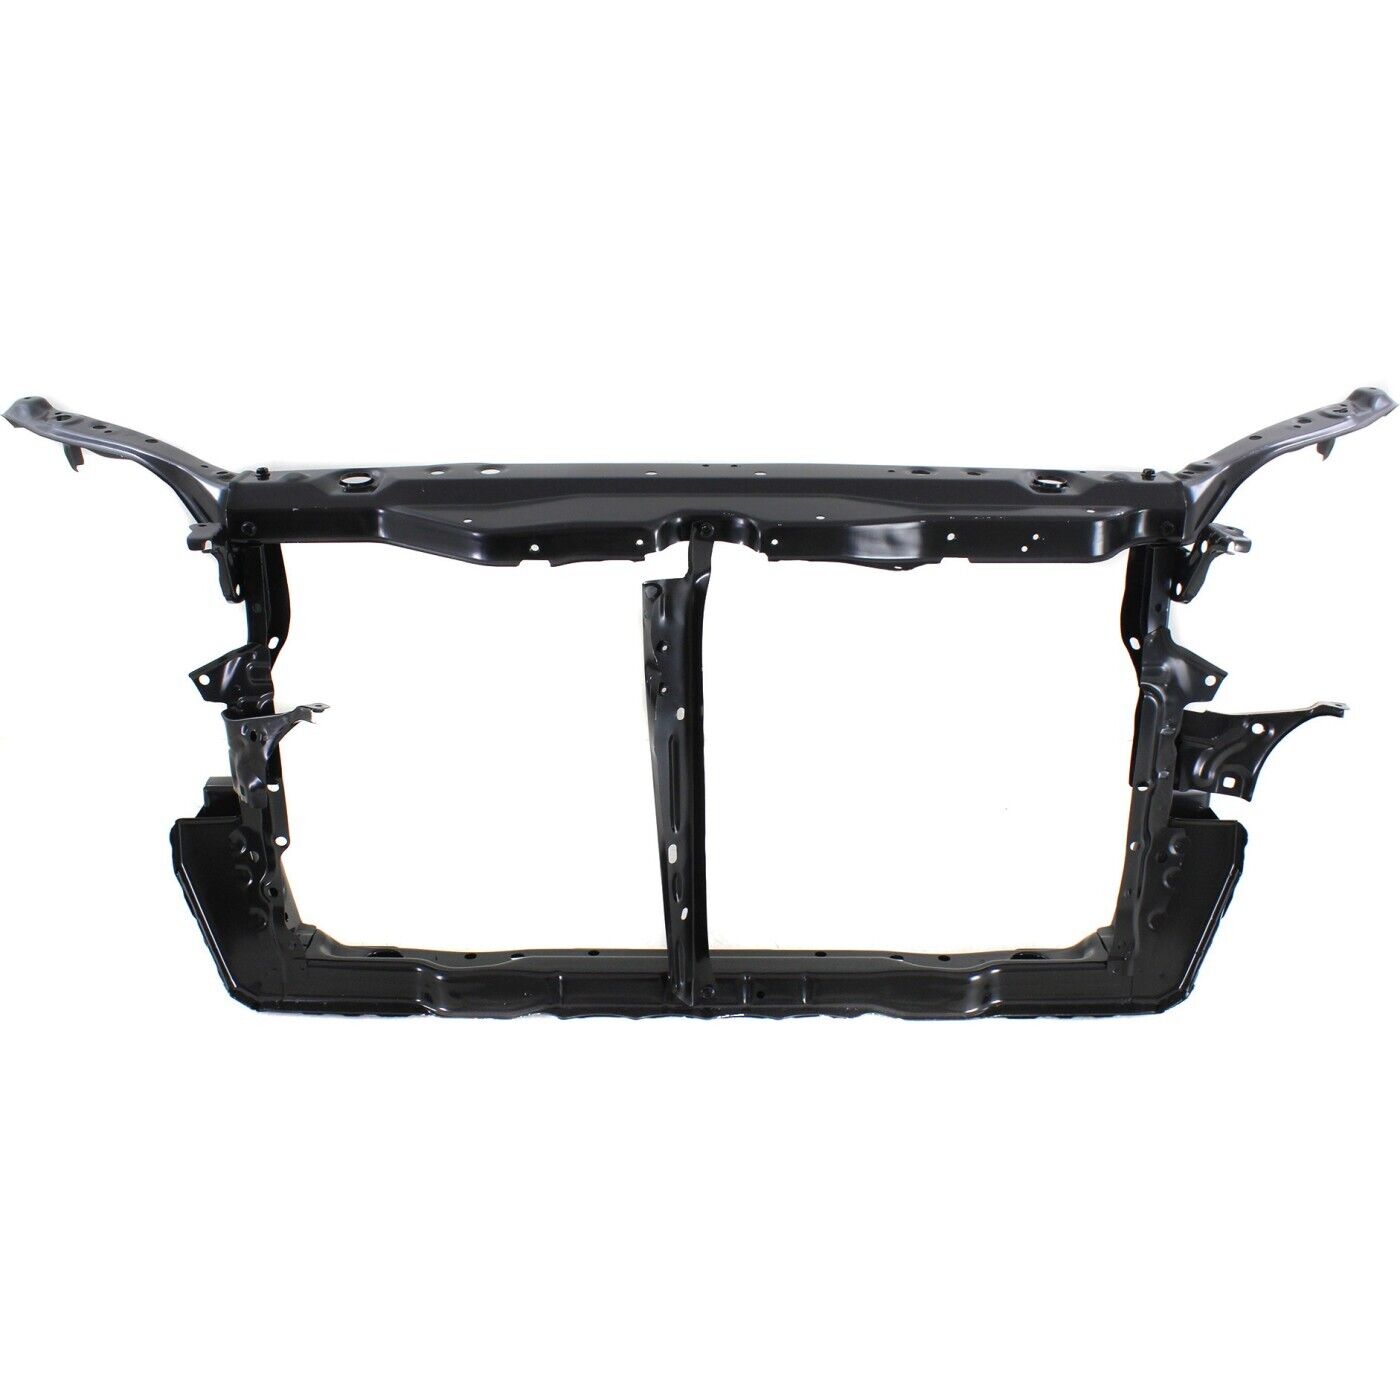 Radiator Support For 2005-2010 Toyota Avalon Assembly